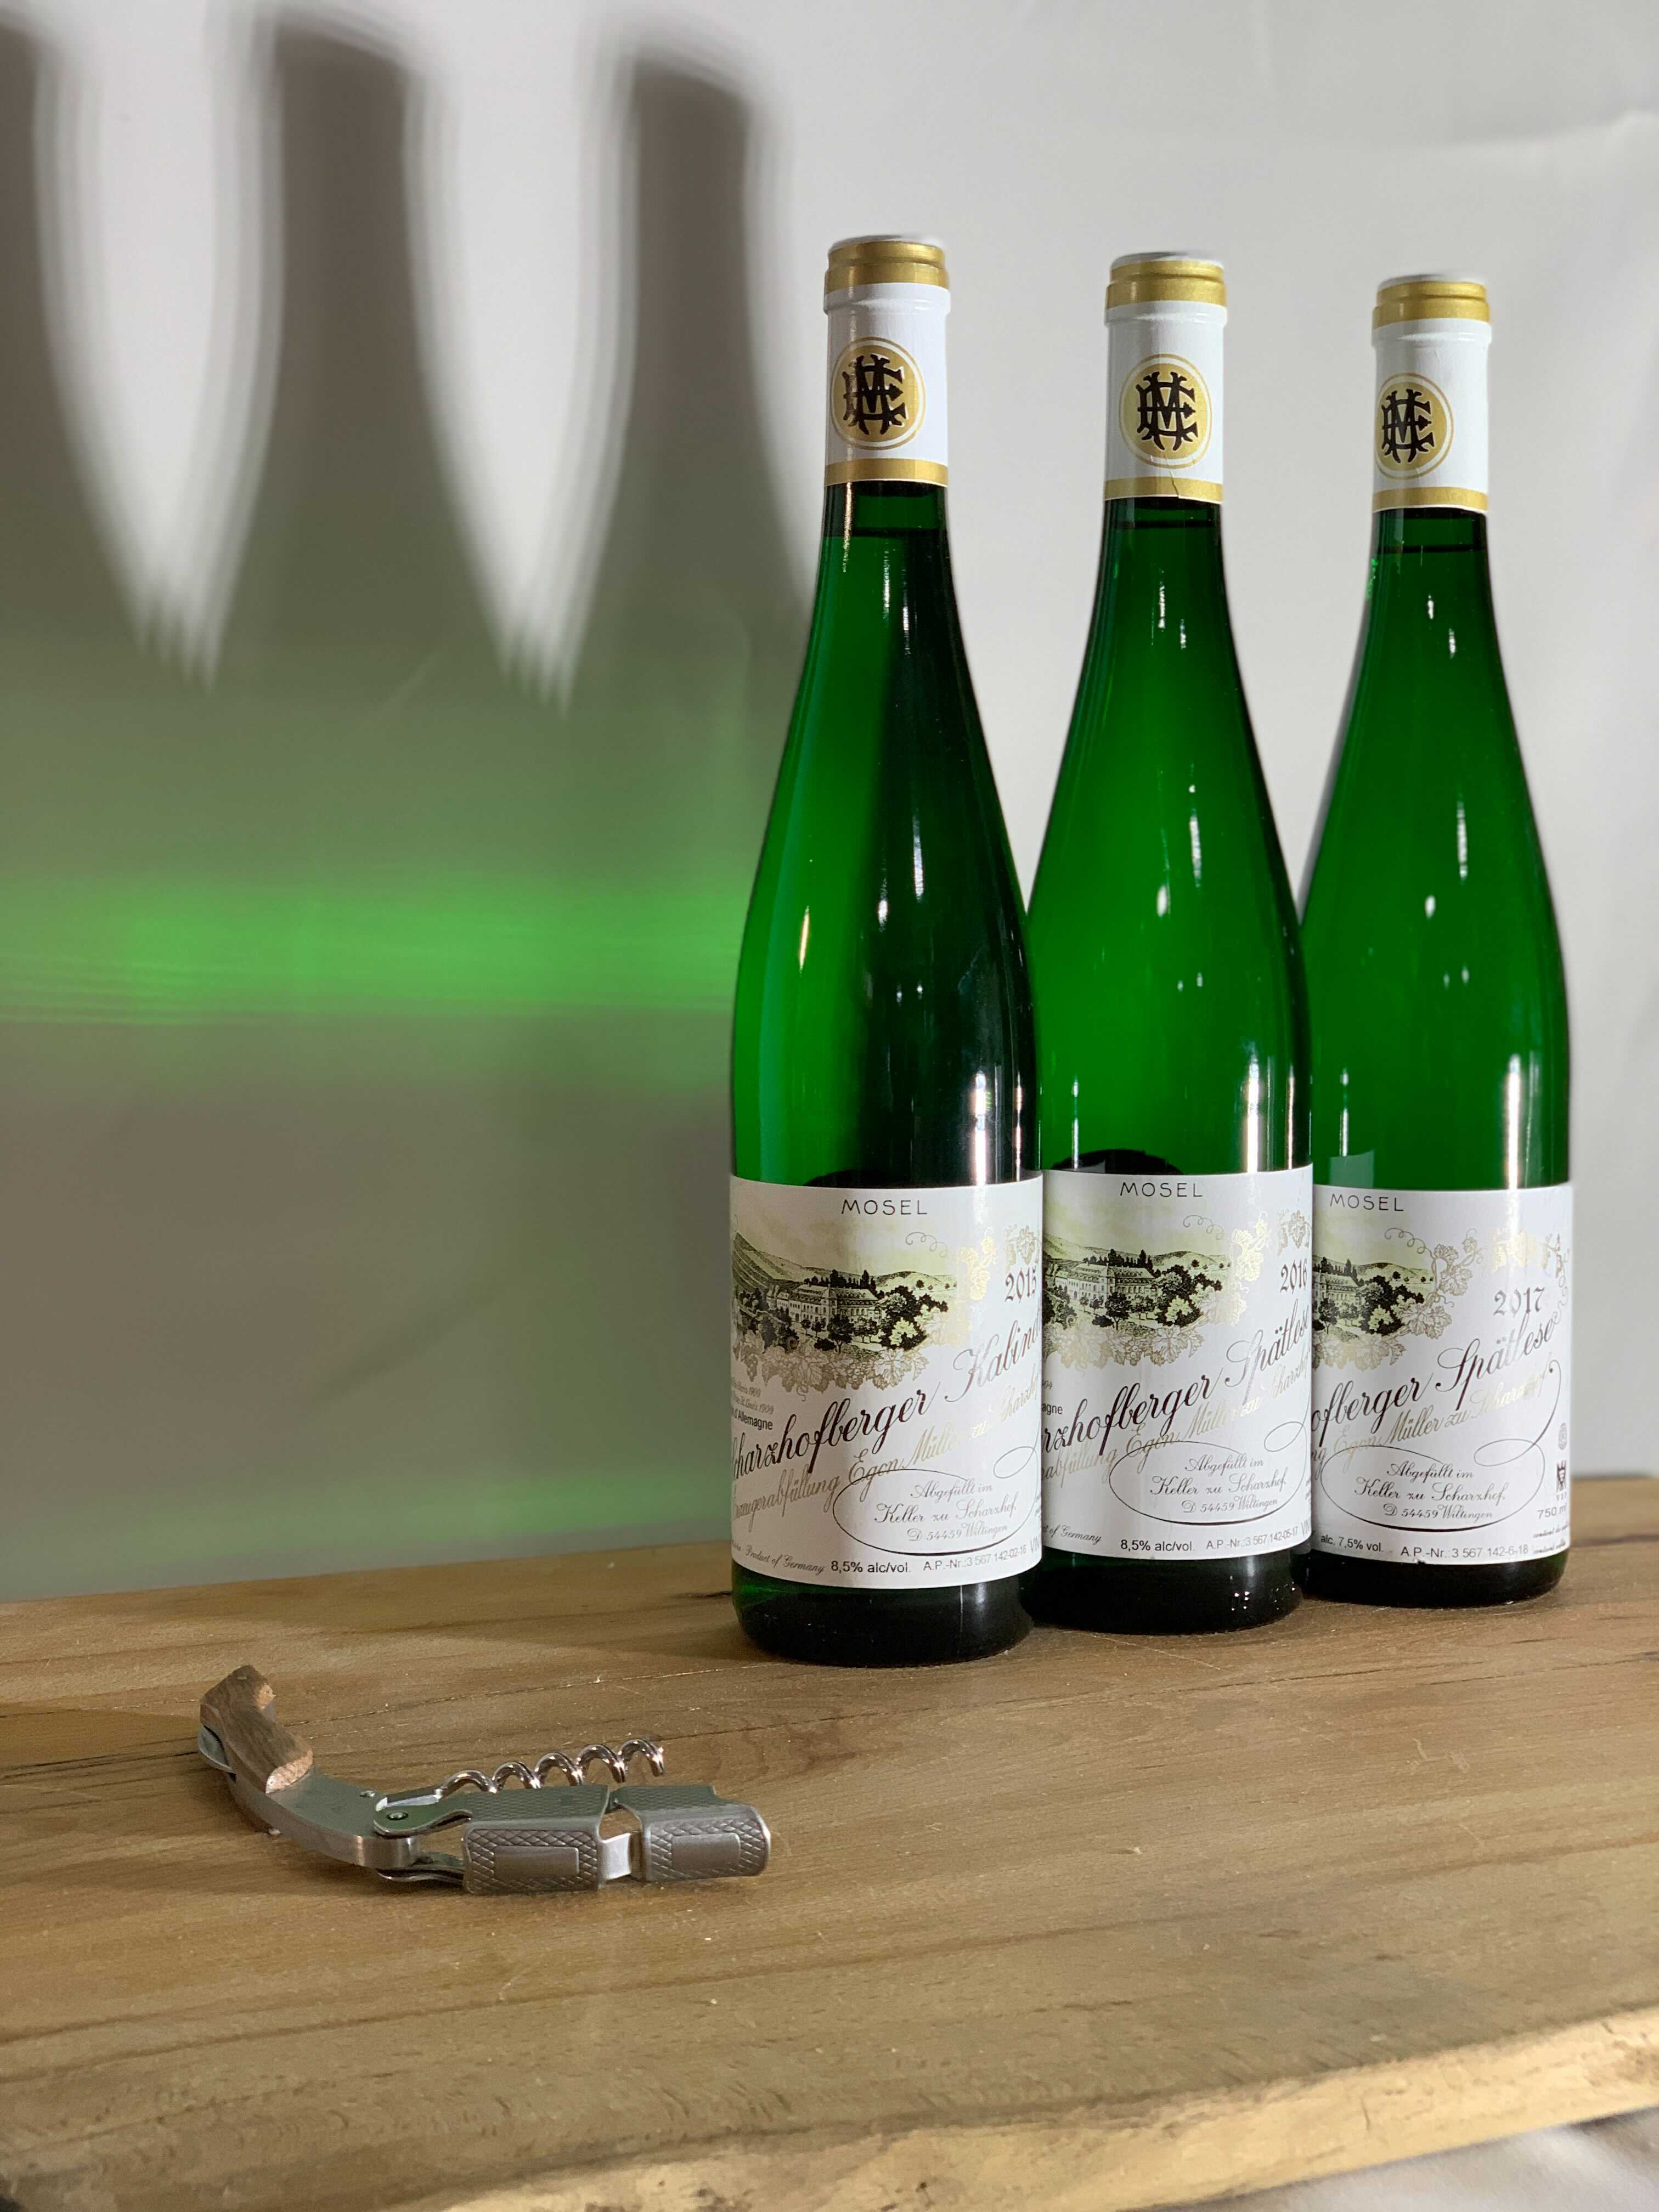 From March 23 to 30, Canadian wine collectors seeking benchmark wines from iconic vineyards, including Mösel’s Egon Müller Scharzhofberg Riesling, can bid online at IronGateAuctions.com.